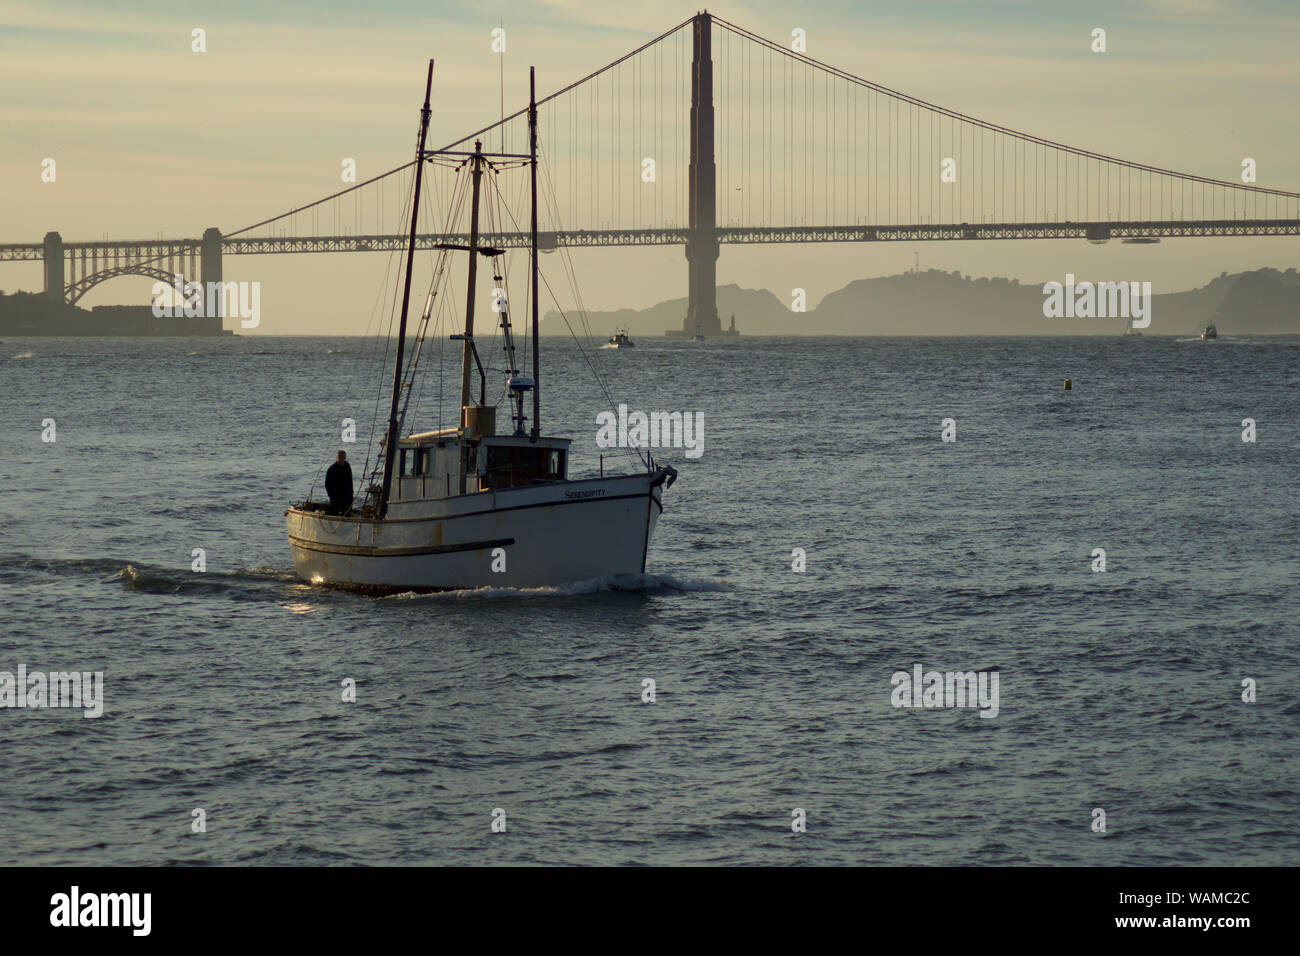 SAN FRANCISCO, CALIFORNIA, UNITED STATES - NOV 25th, 2018: Boat in San Francisco Bay with Golden Gate Bridge in the background during sunset Stock Photo